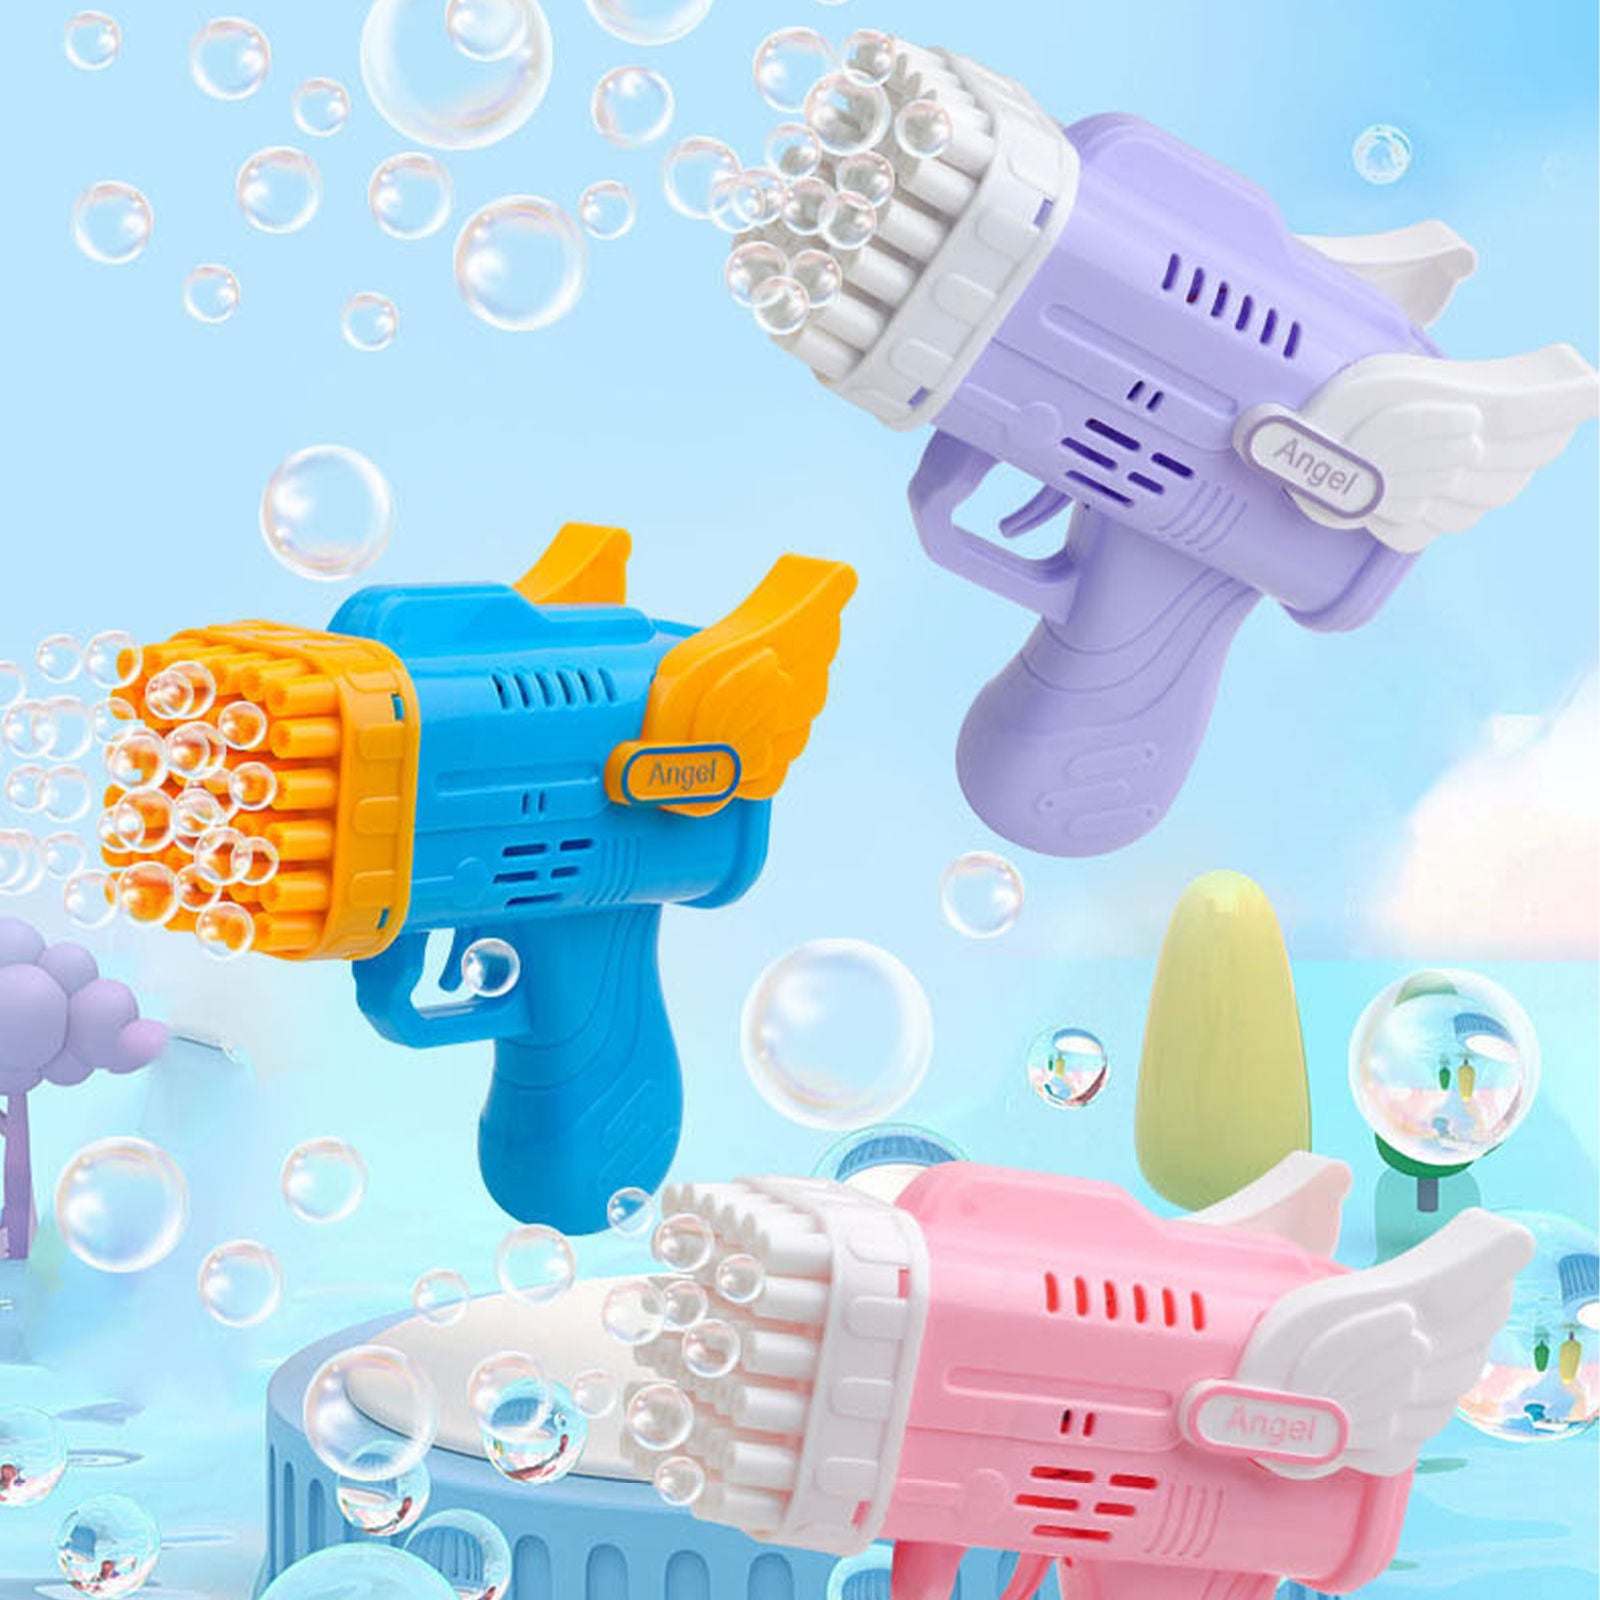 42 Hole Angel Wing Automatic Bubble Blowing Lovely Bubble Gun Launcher Toy Pink